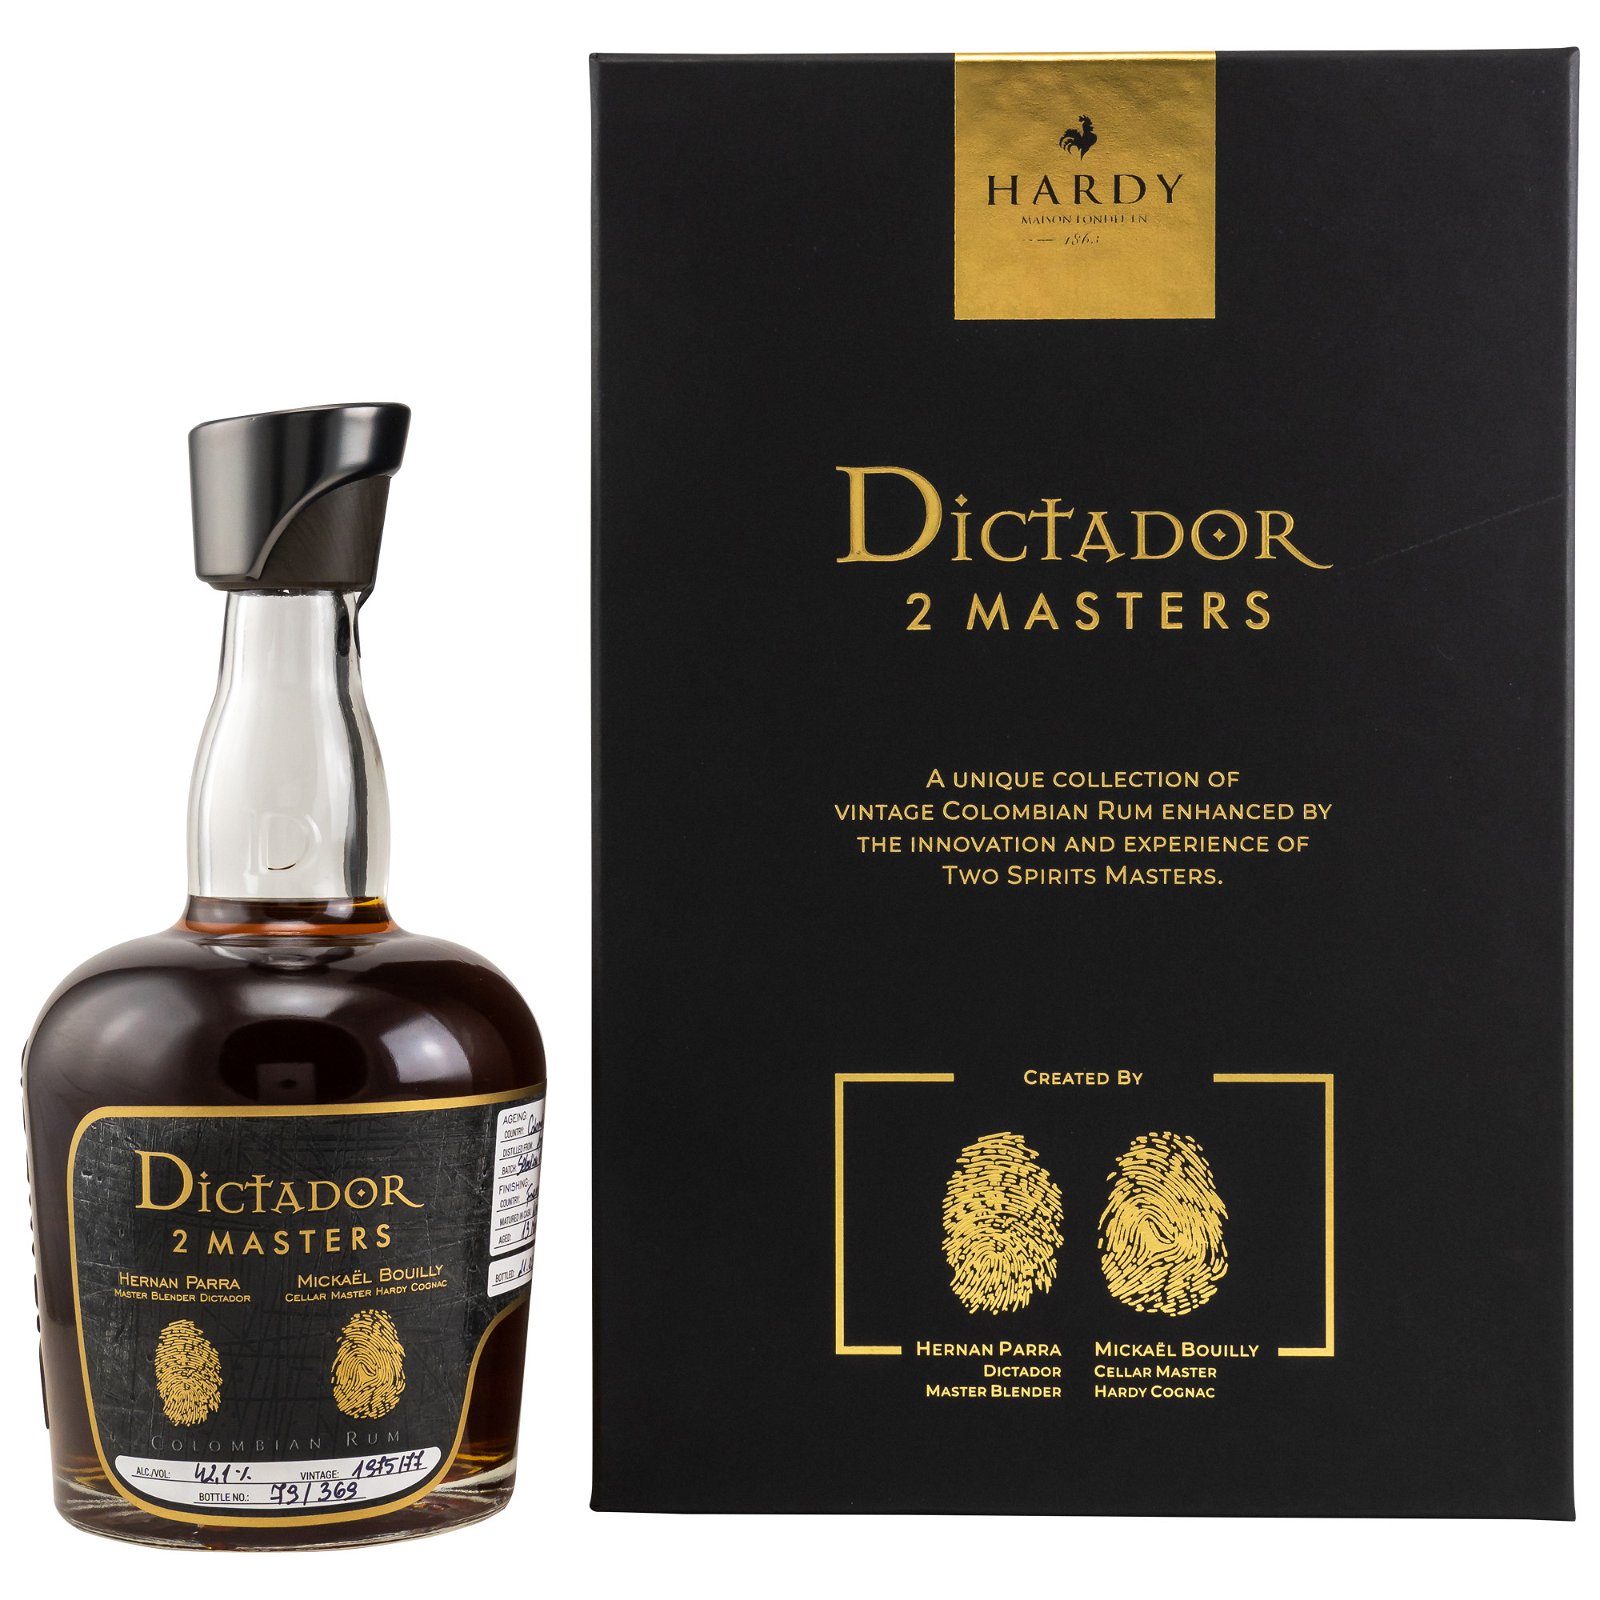 Dictador 2 Masters Hardy Spring 1975/77 Colombian Rum 